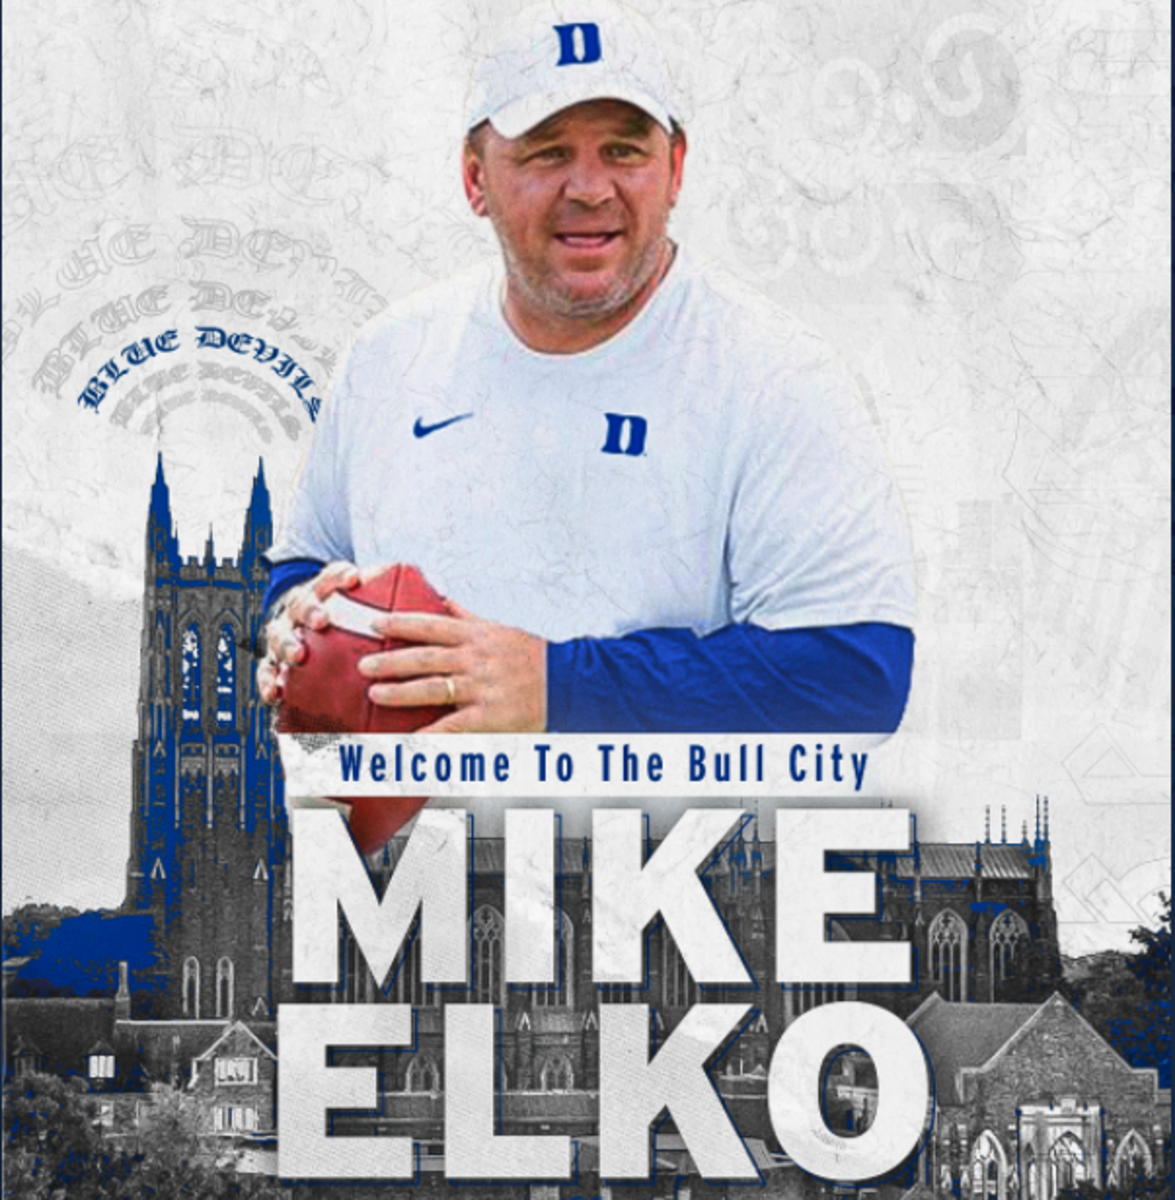 Anonymous opposing ACC coach says Mike Elko's success at Duke put a 'target  on your back